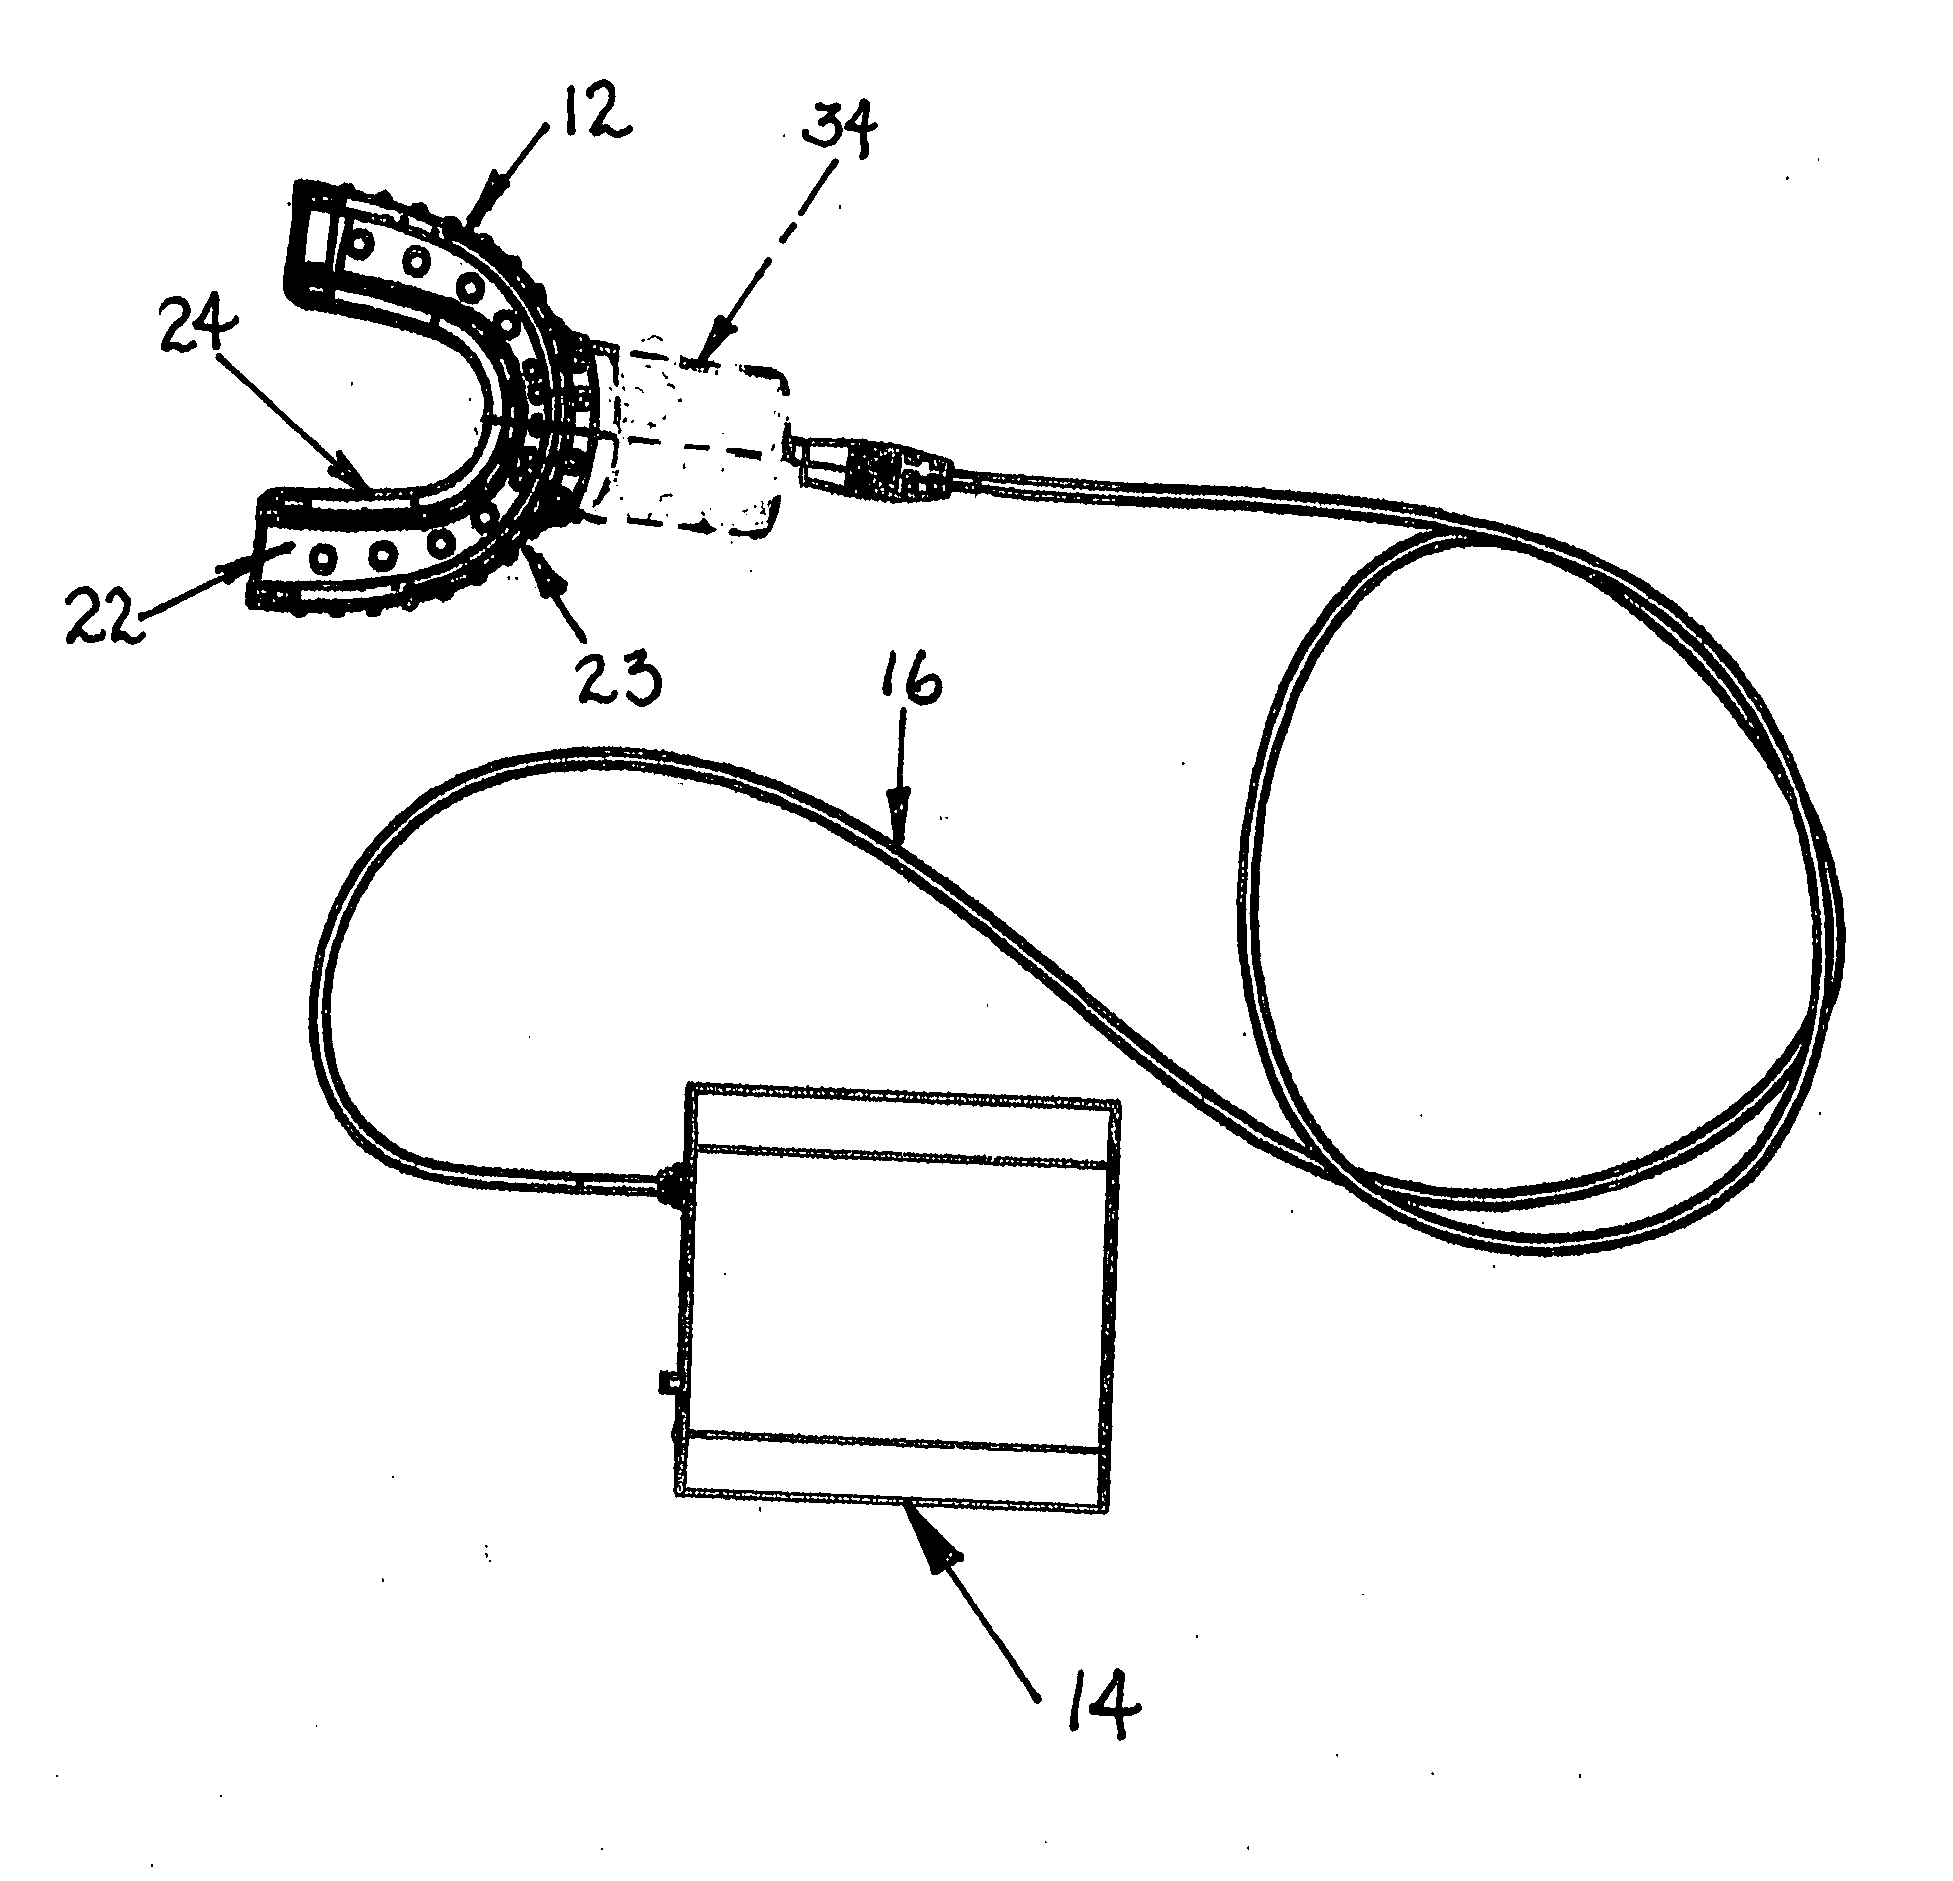 Phototherapy mouthpiece for enhancing the replication of gum cells